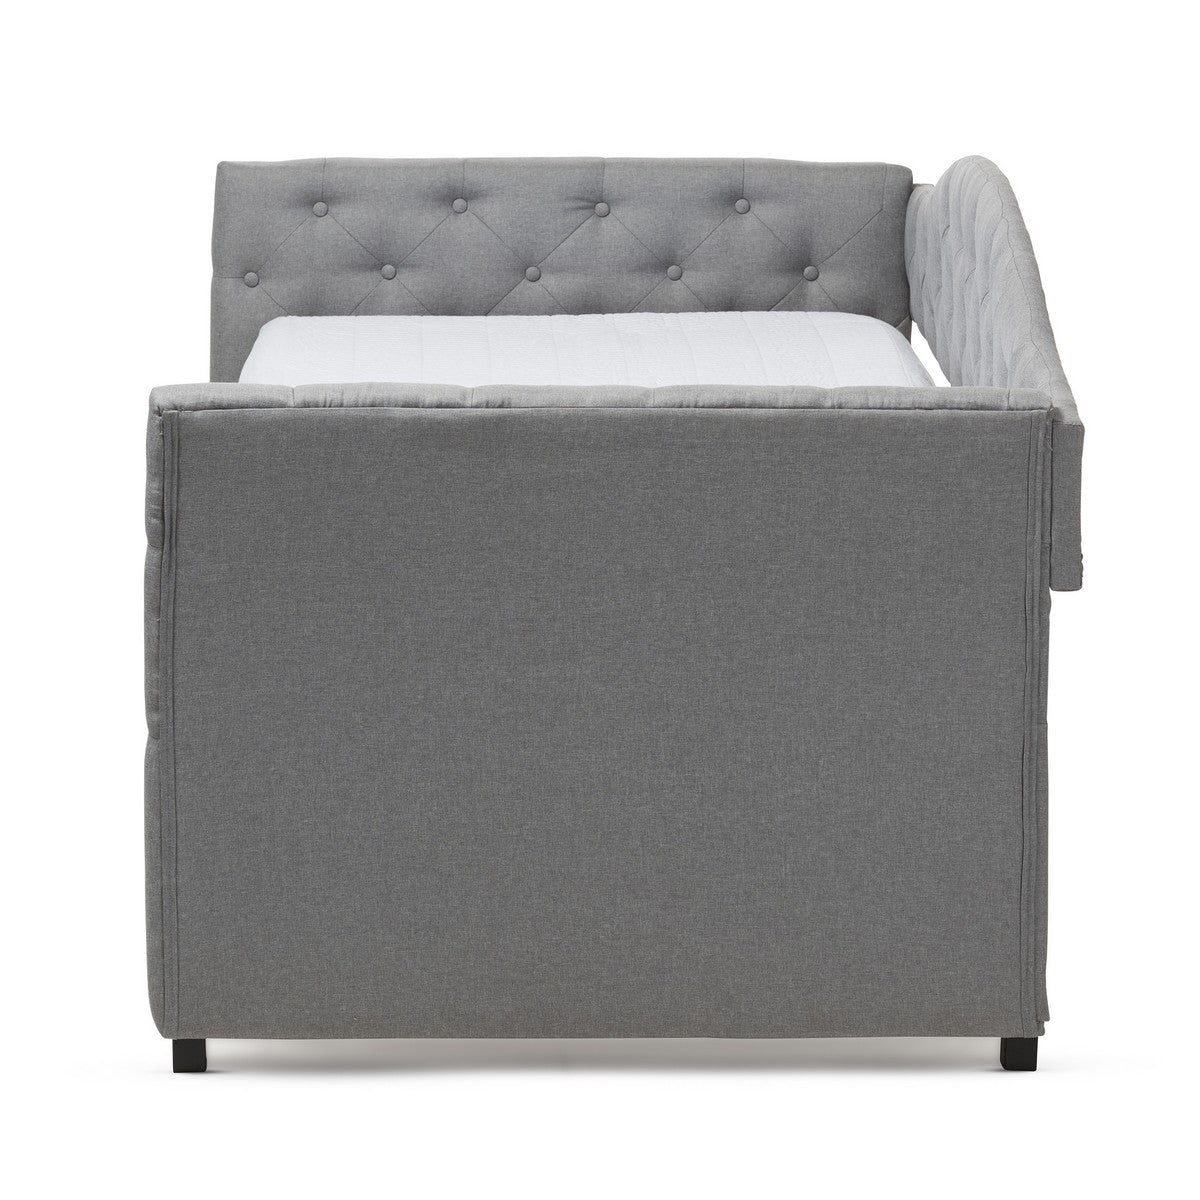 Baxton Studio Gwendolyn Modern and Contemporary Grey Fabric Upholstered Daybed with Trundle